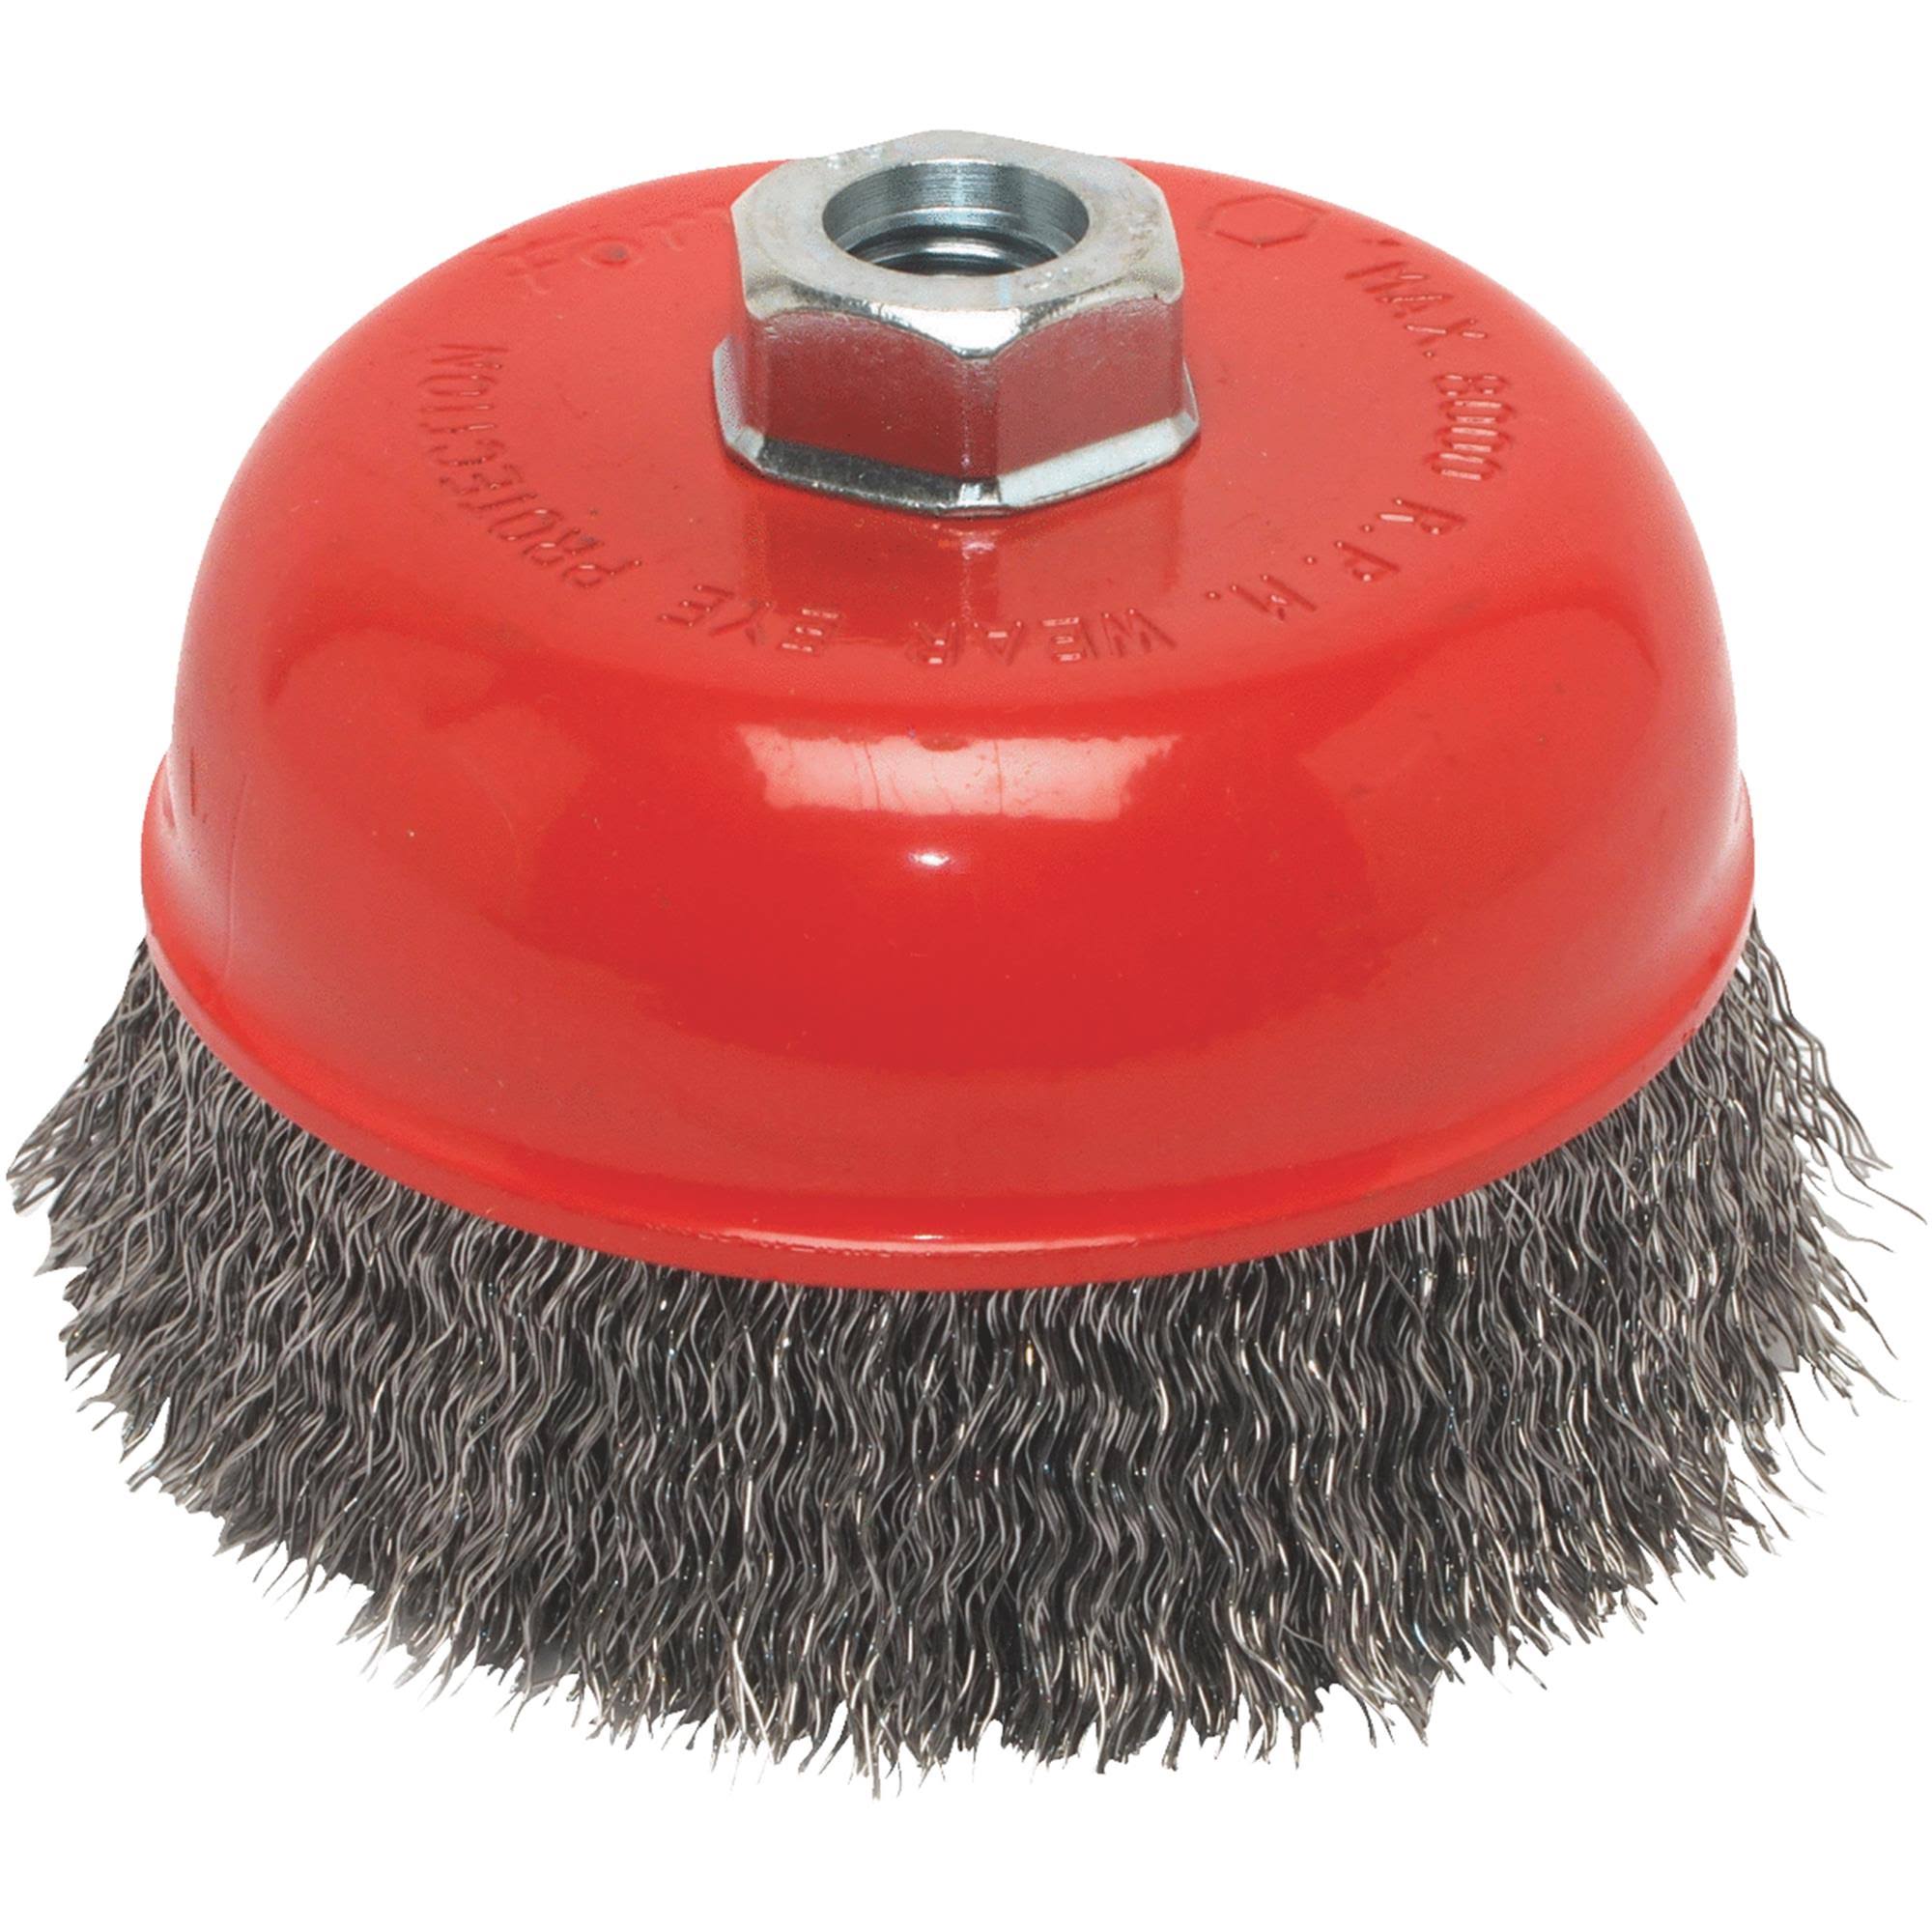 Forney 72754 Coarse Crimped Wire Cup Brush - 5"